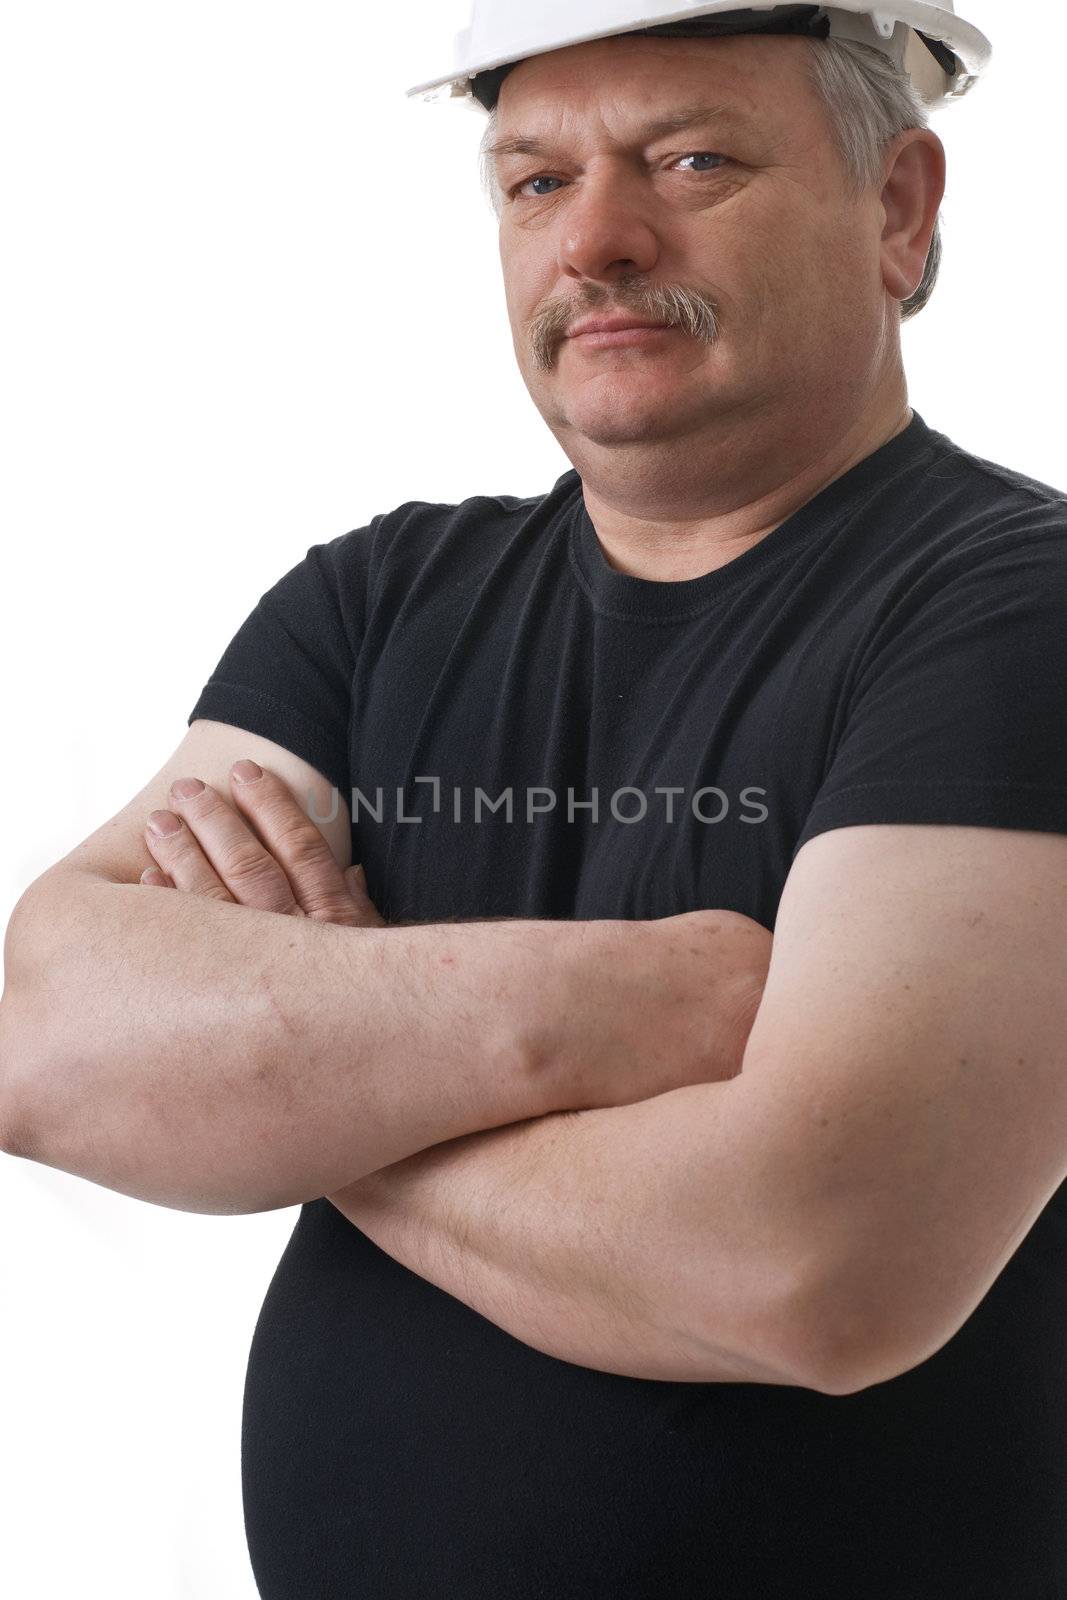 Confident boss expression portrait on white background